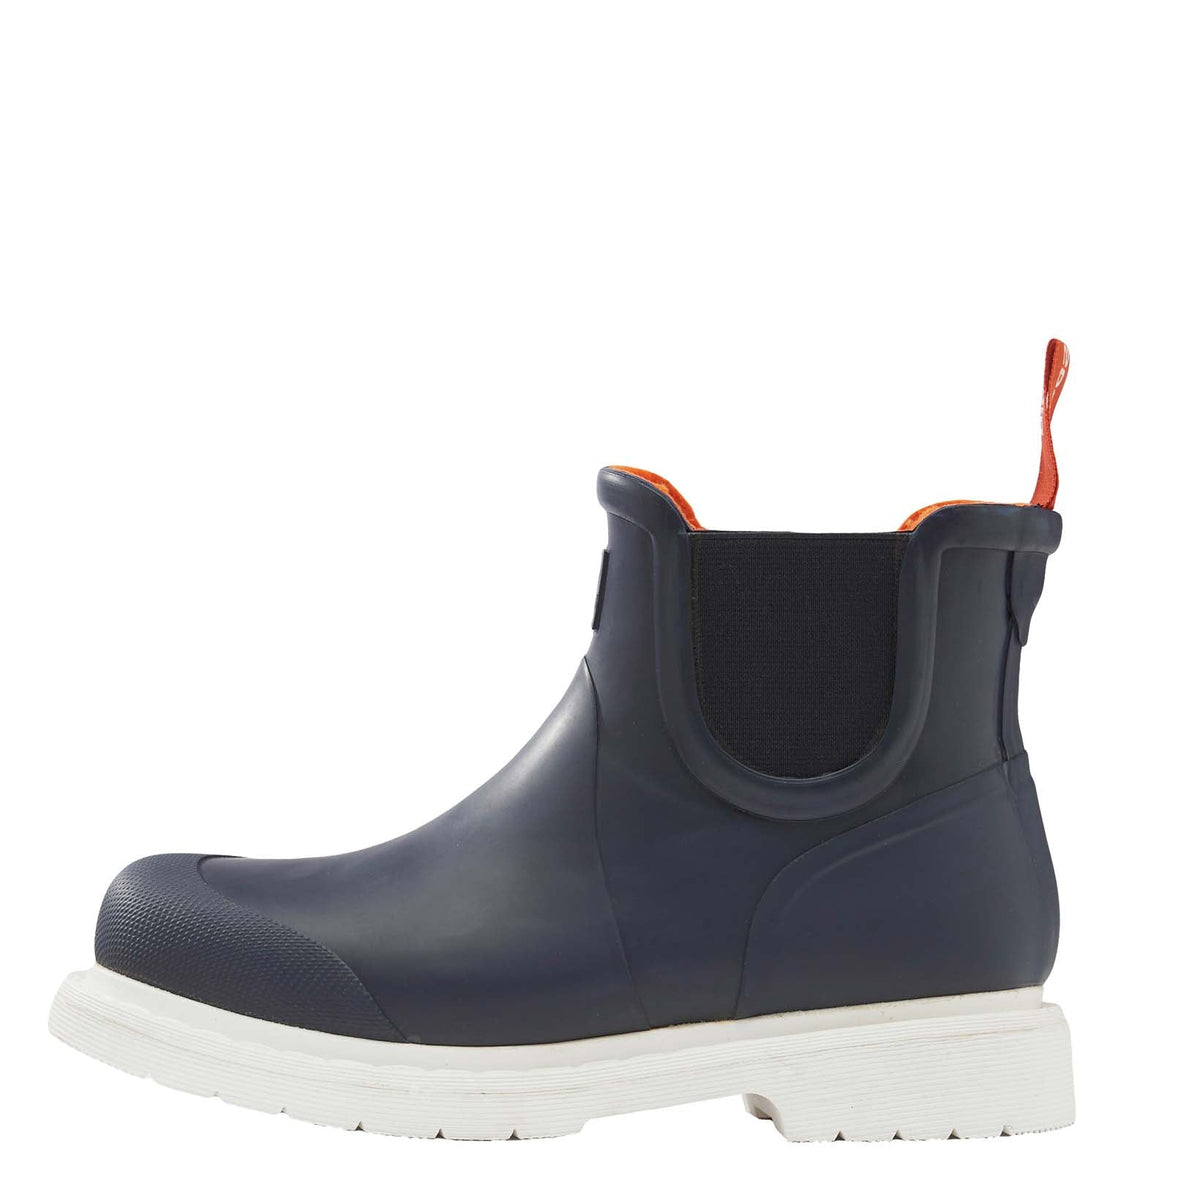 Vinga Wns Rubber Boots-Didriksons-Conrad Hasselbach Shoes &amp; Garment